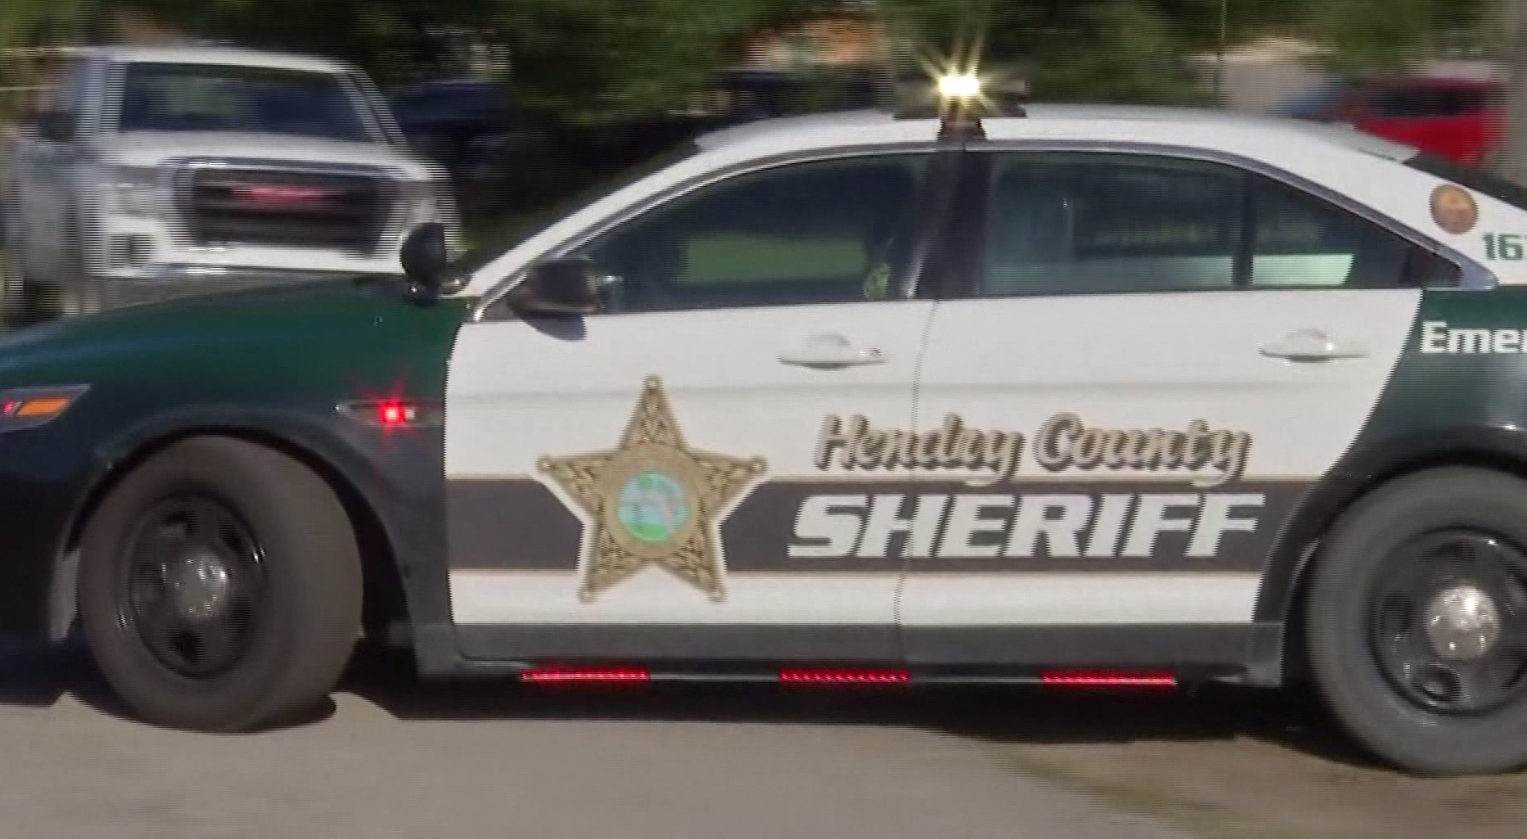 hendry county sheriff's office